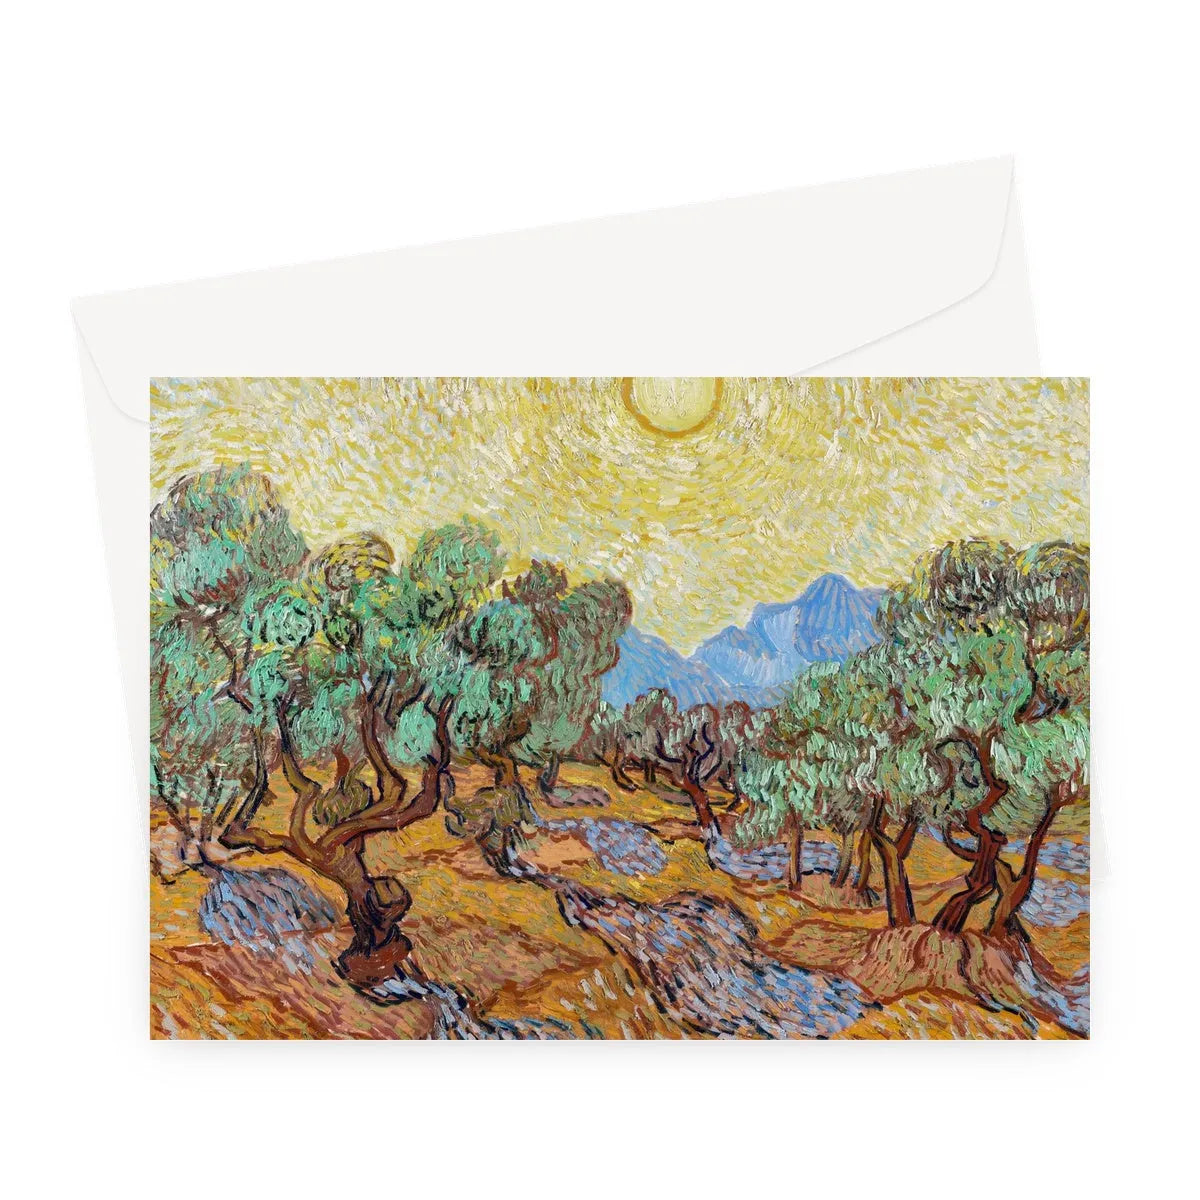 Olive Trees Too By Vincent Van Gogh Greeting Card - A5 Landscape / 10 Cards - Notebooks & Notepads - Aesthetic Art